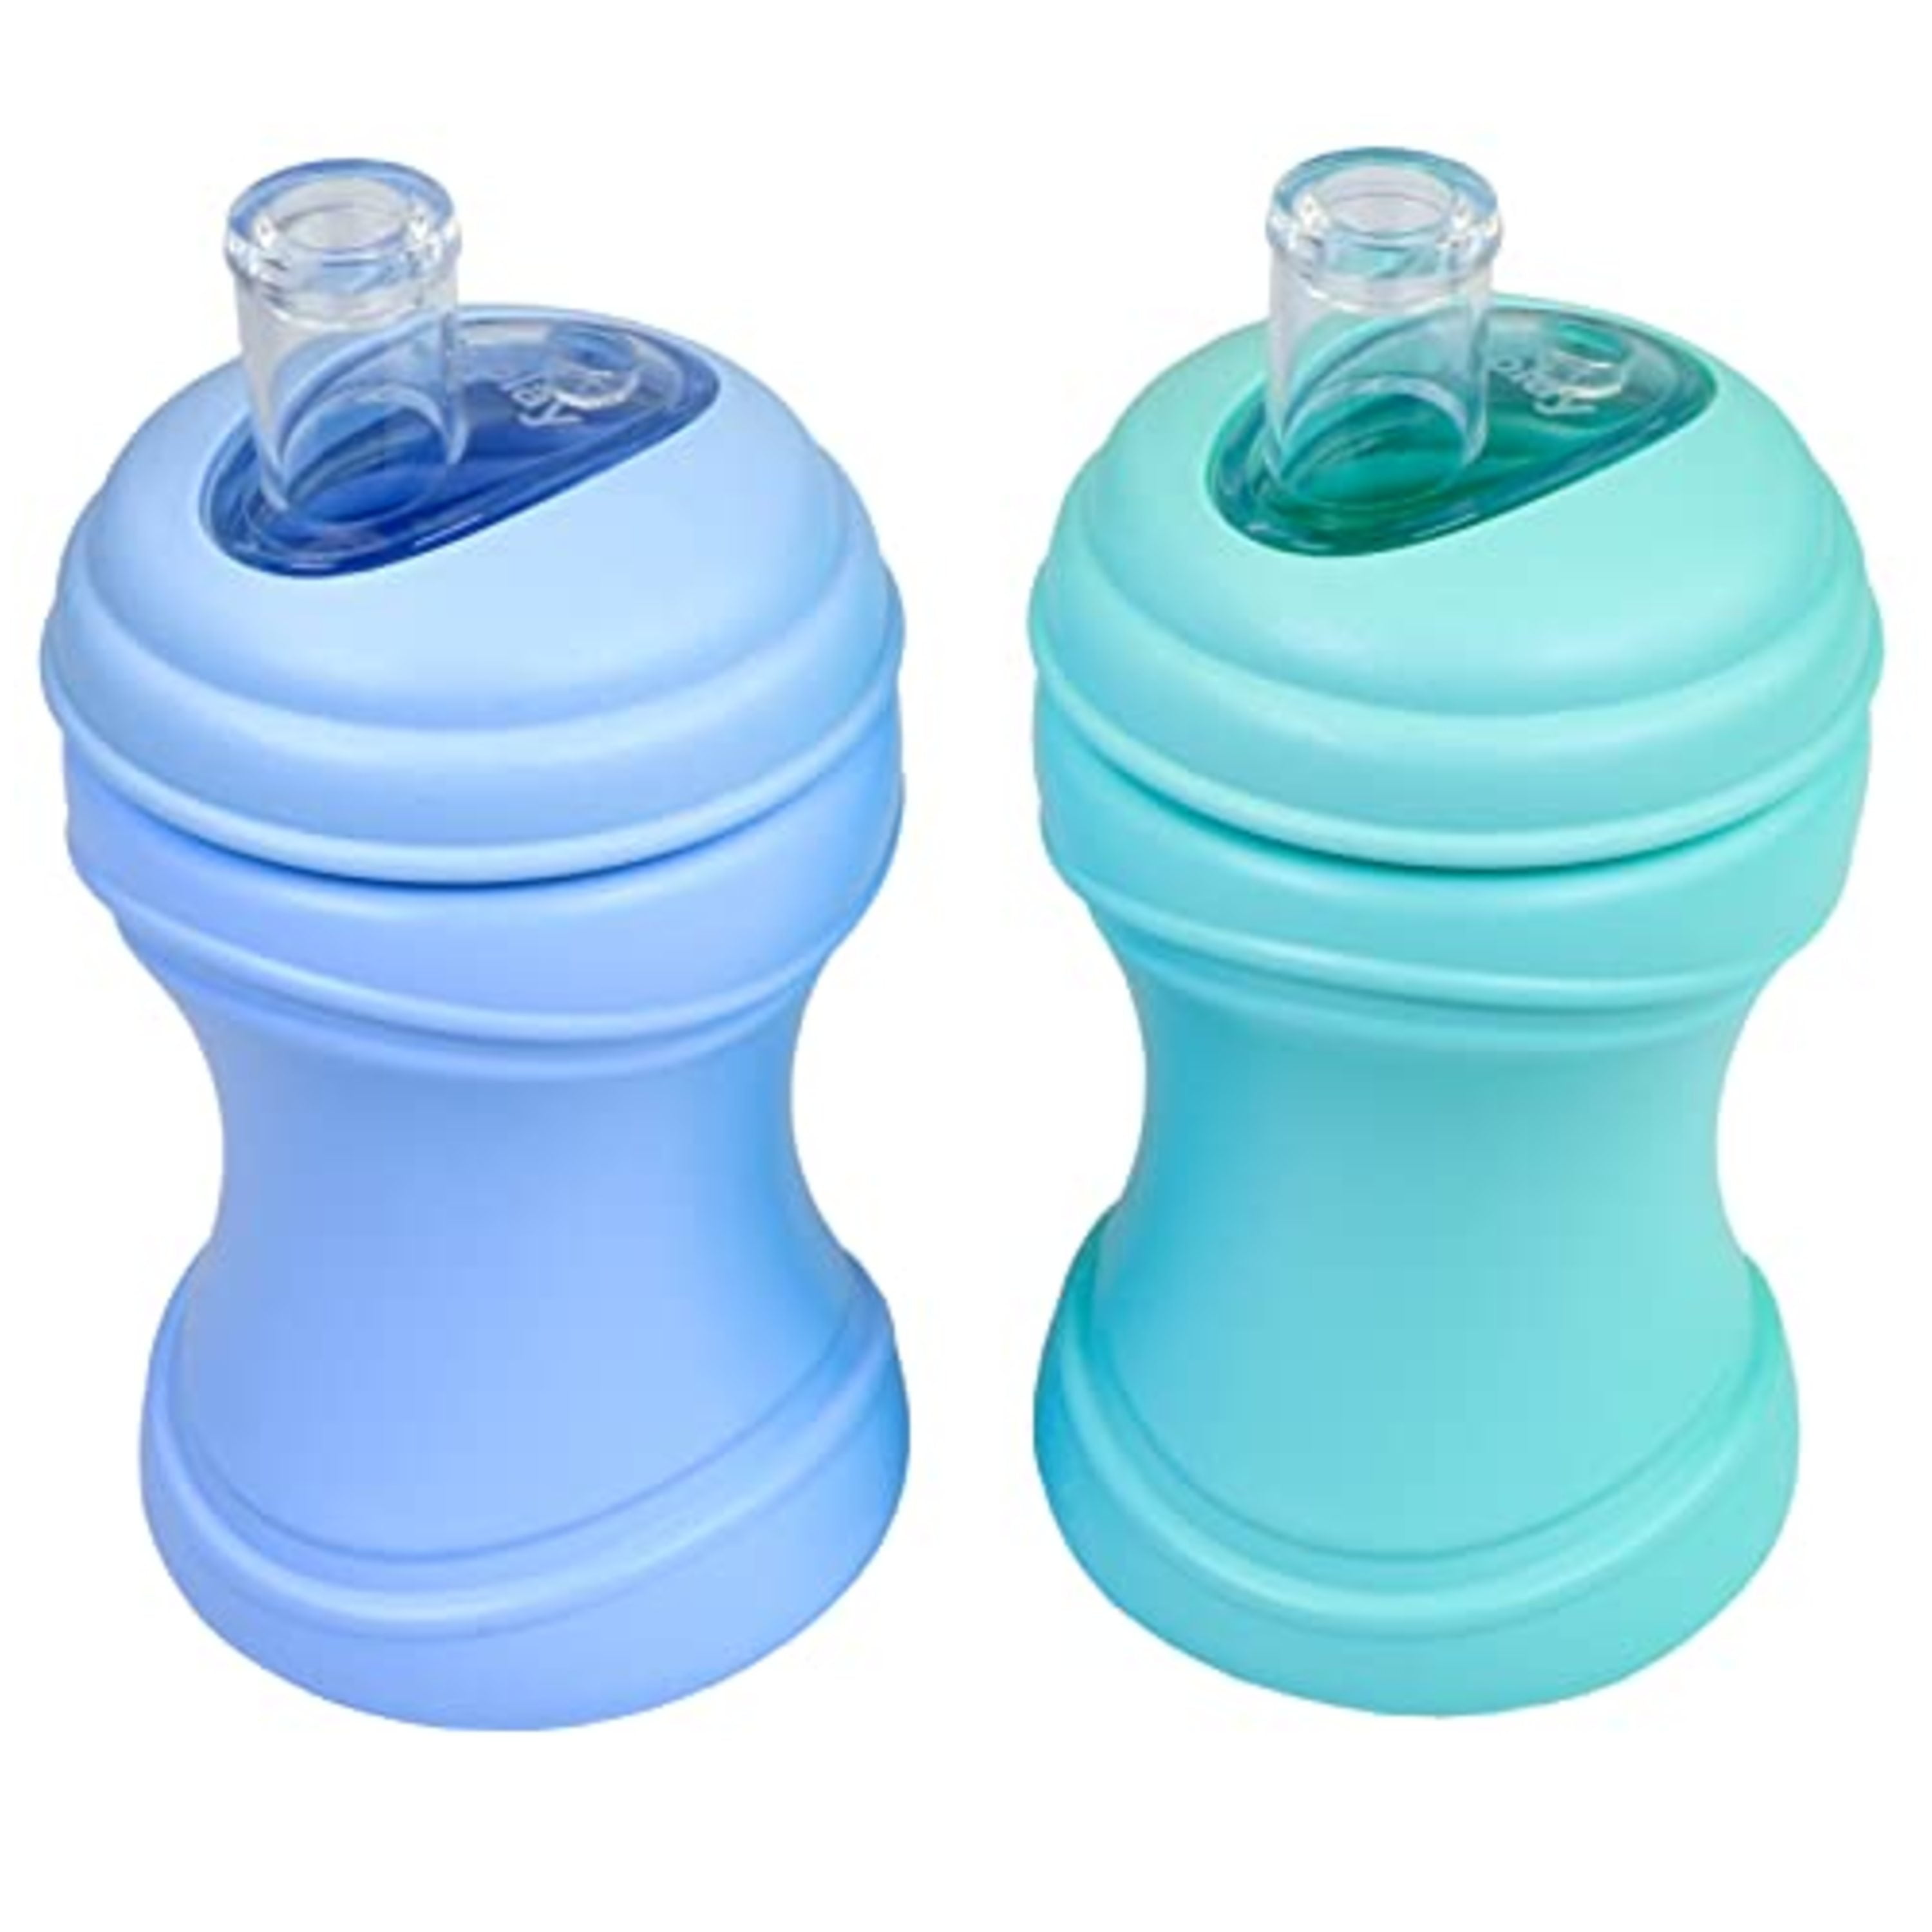 Re-Play Baby Sippy Cups for Toddlers 2pk Soft Spout Sippy Cup Ice Blue Mint